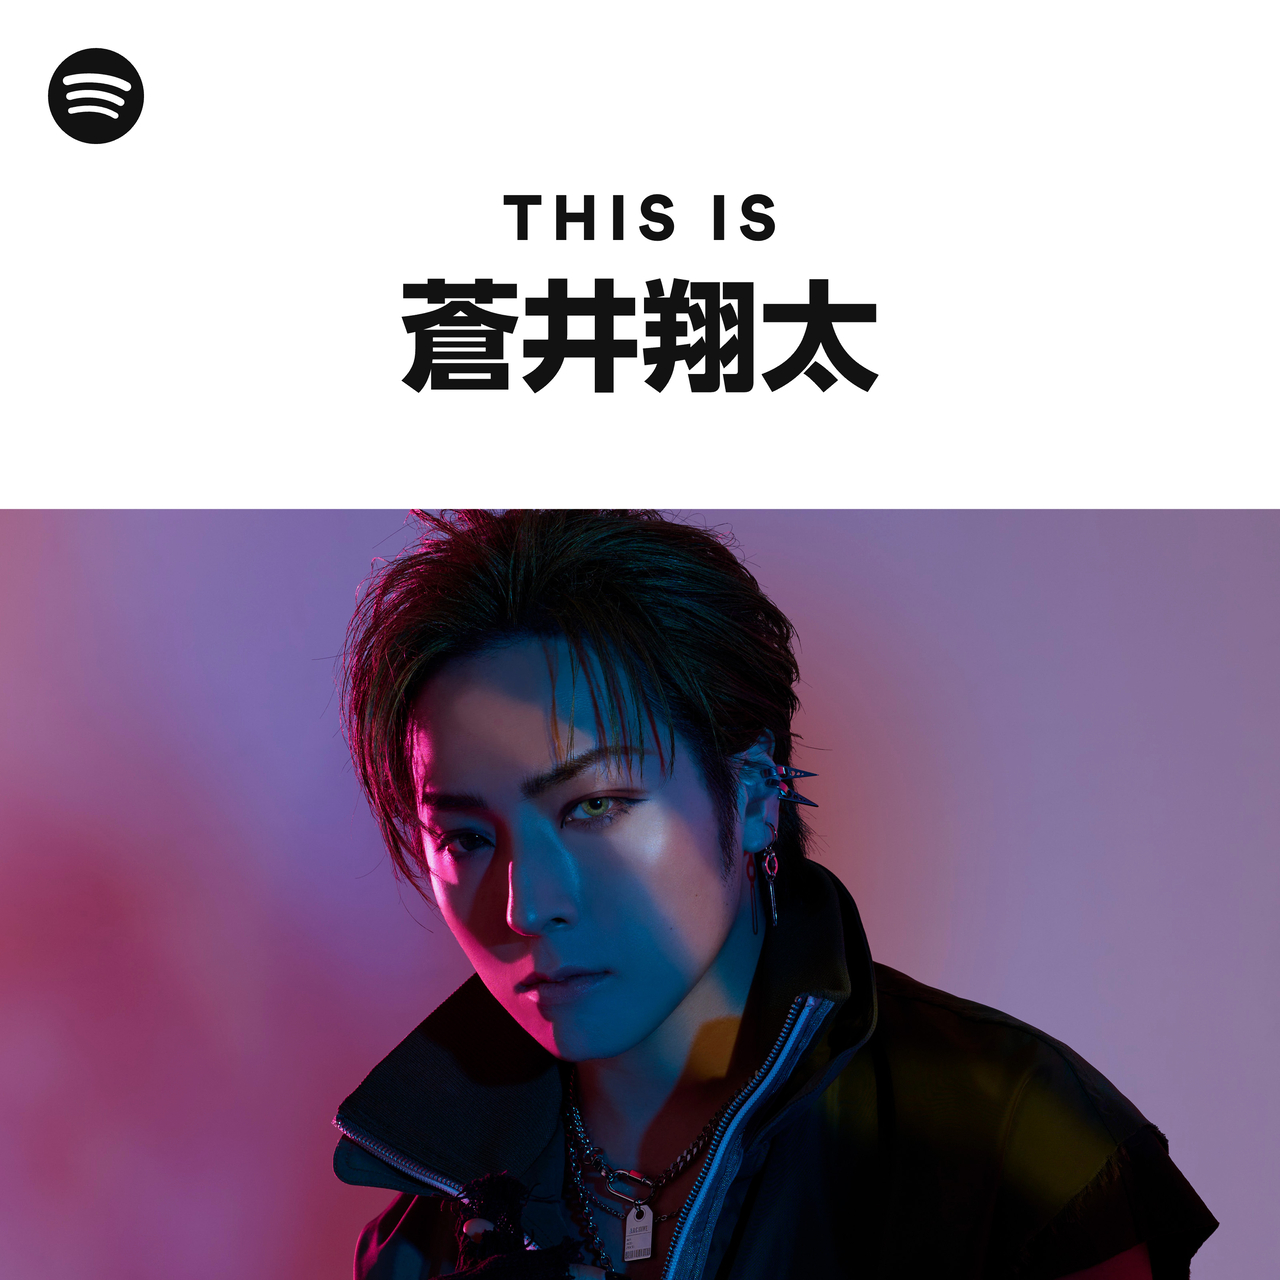 This Is Shouta Aoi Spotify Playlist